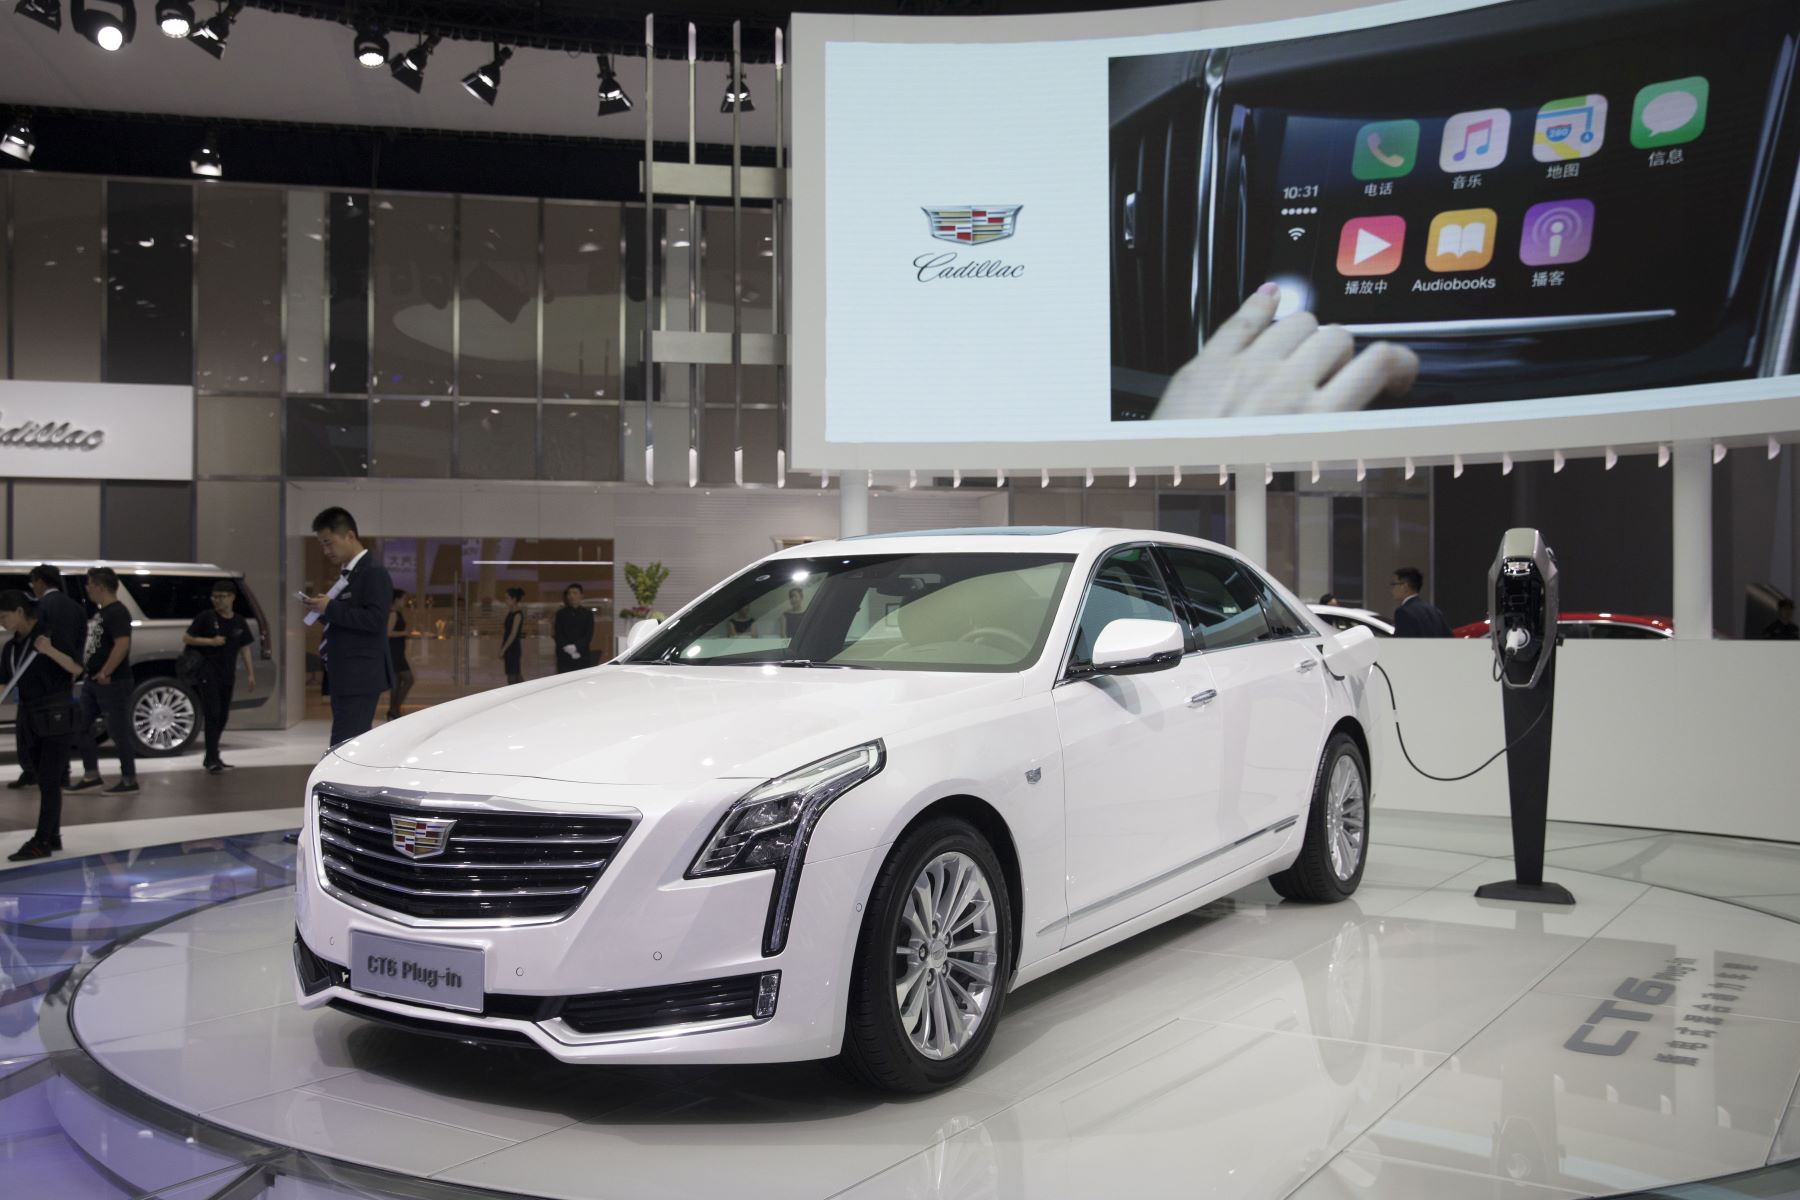 A white Cadillac CT6 plug-in hybrid (PHEV) plugged into a charging station at Auto Shanghai 2017